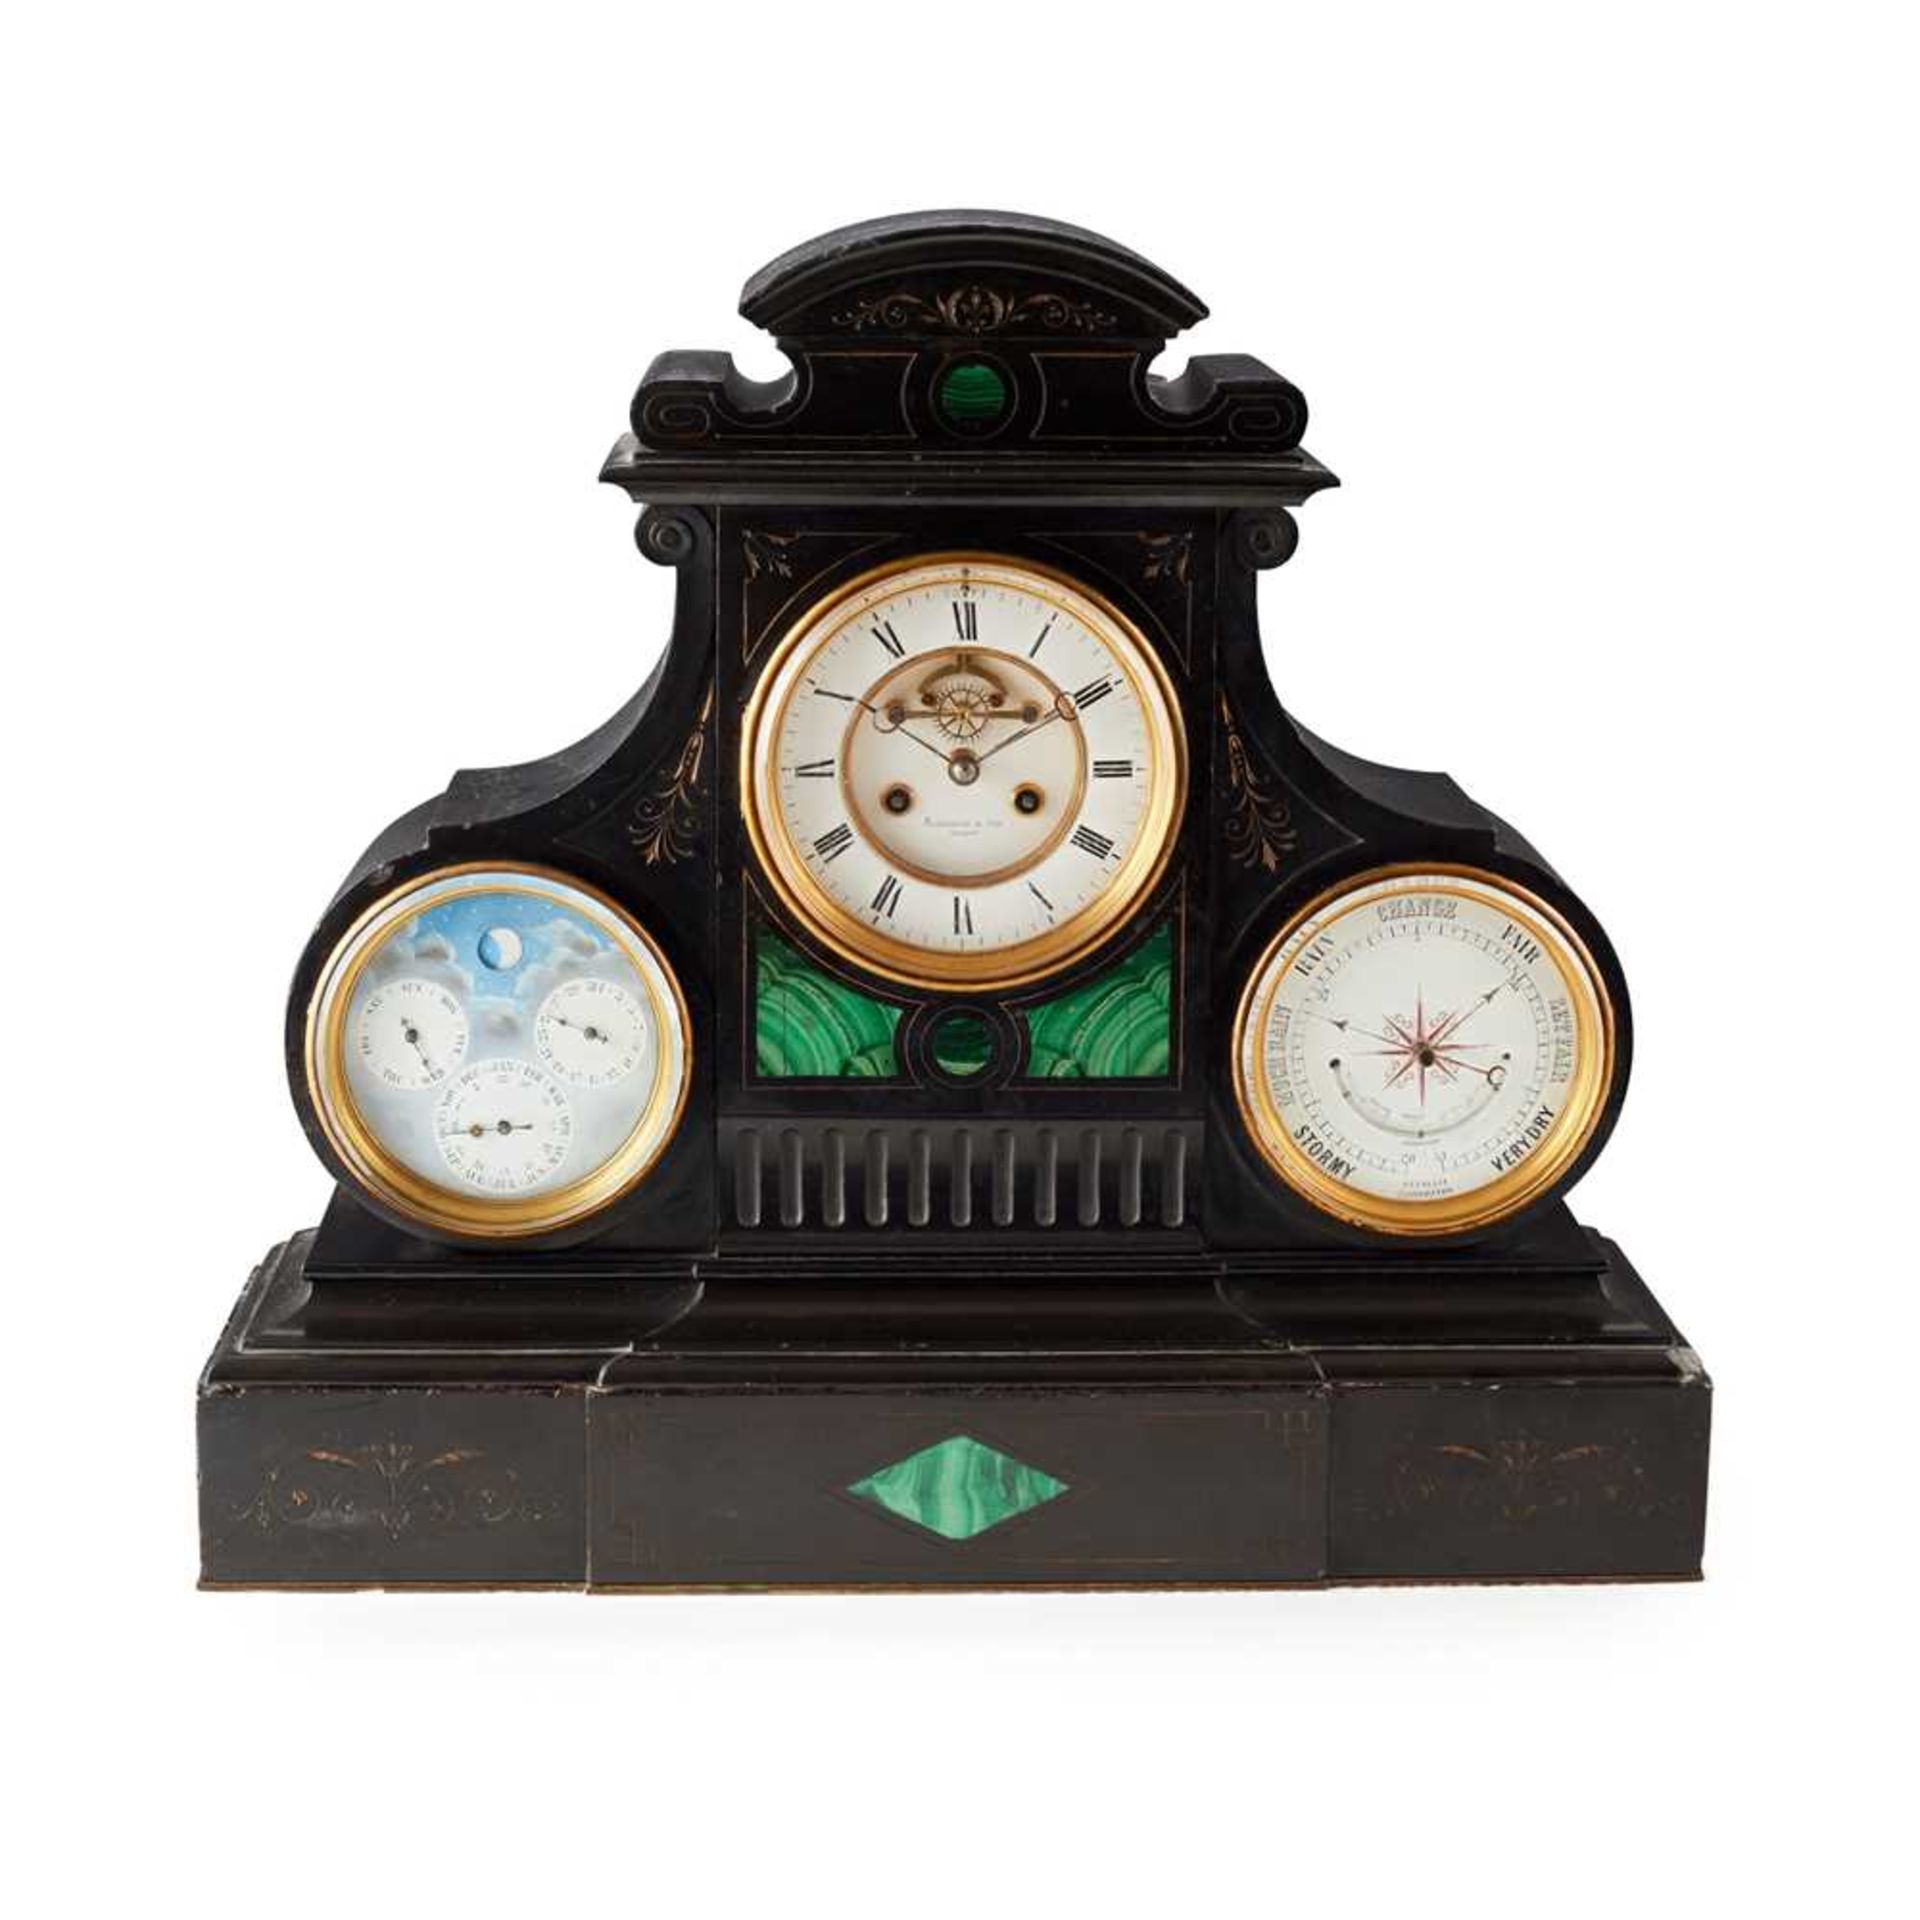 A LARGE SLATE AND MALACHITE PERPETUAL CALENDAR MANTEL CLOCK WITH BAROMETER, ALEXANDER & SON, GLASGOW